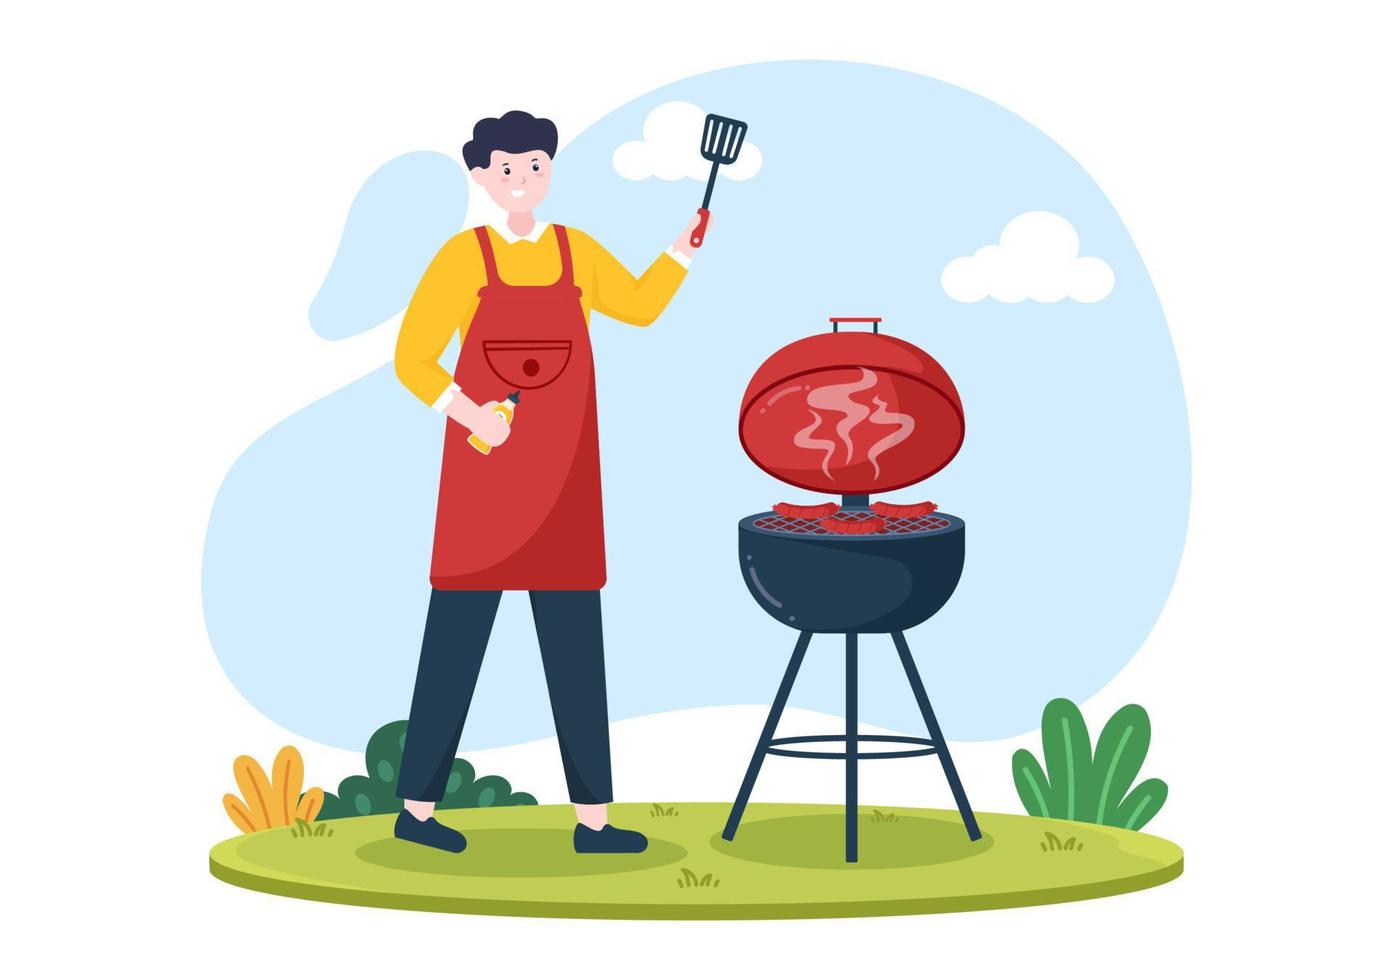 BBQ or Barbecue with Steaks on Grill, Plates, Sausage, Chicken, Vegetables and People on Picnic or Party in the Park in Flat Cartoon Illustration vector